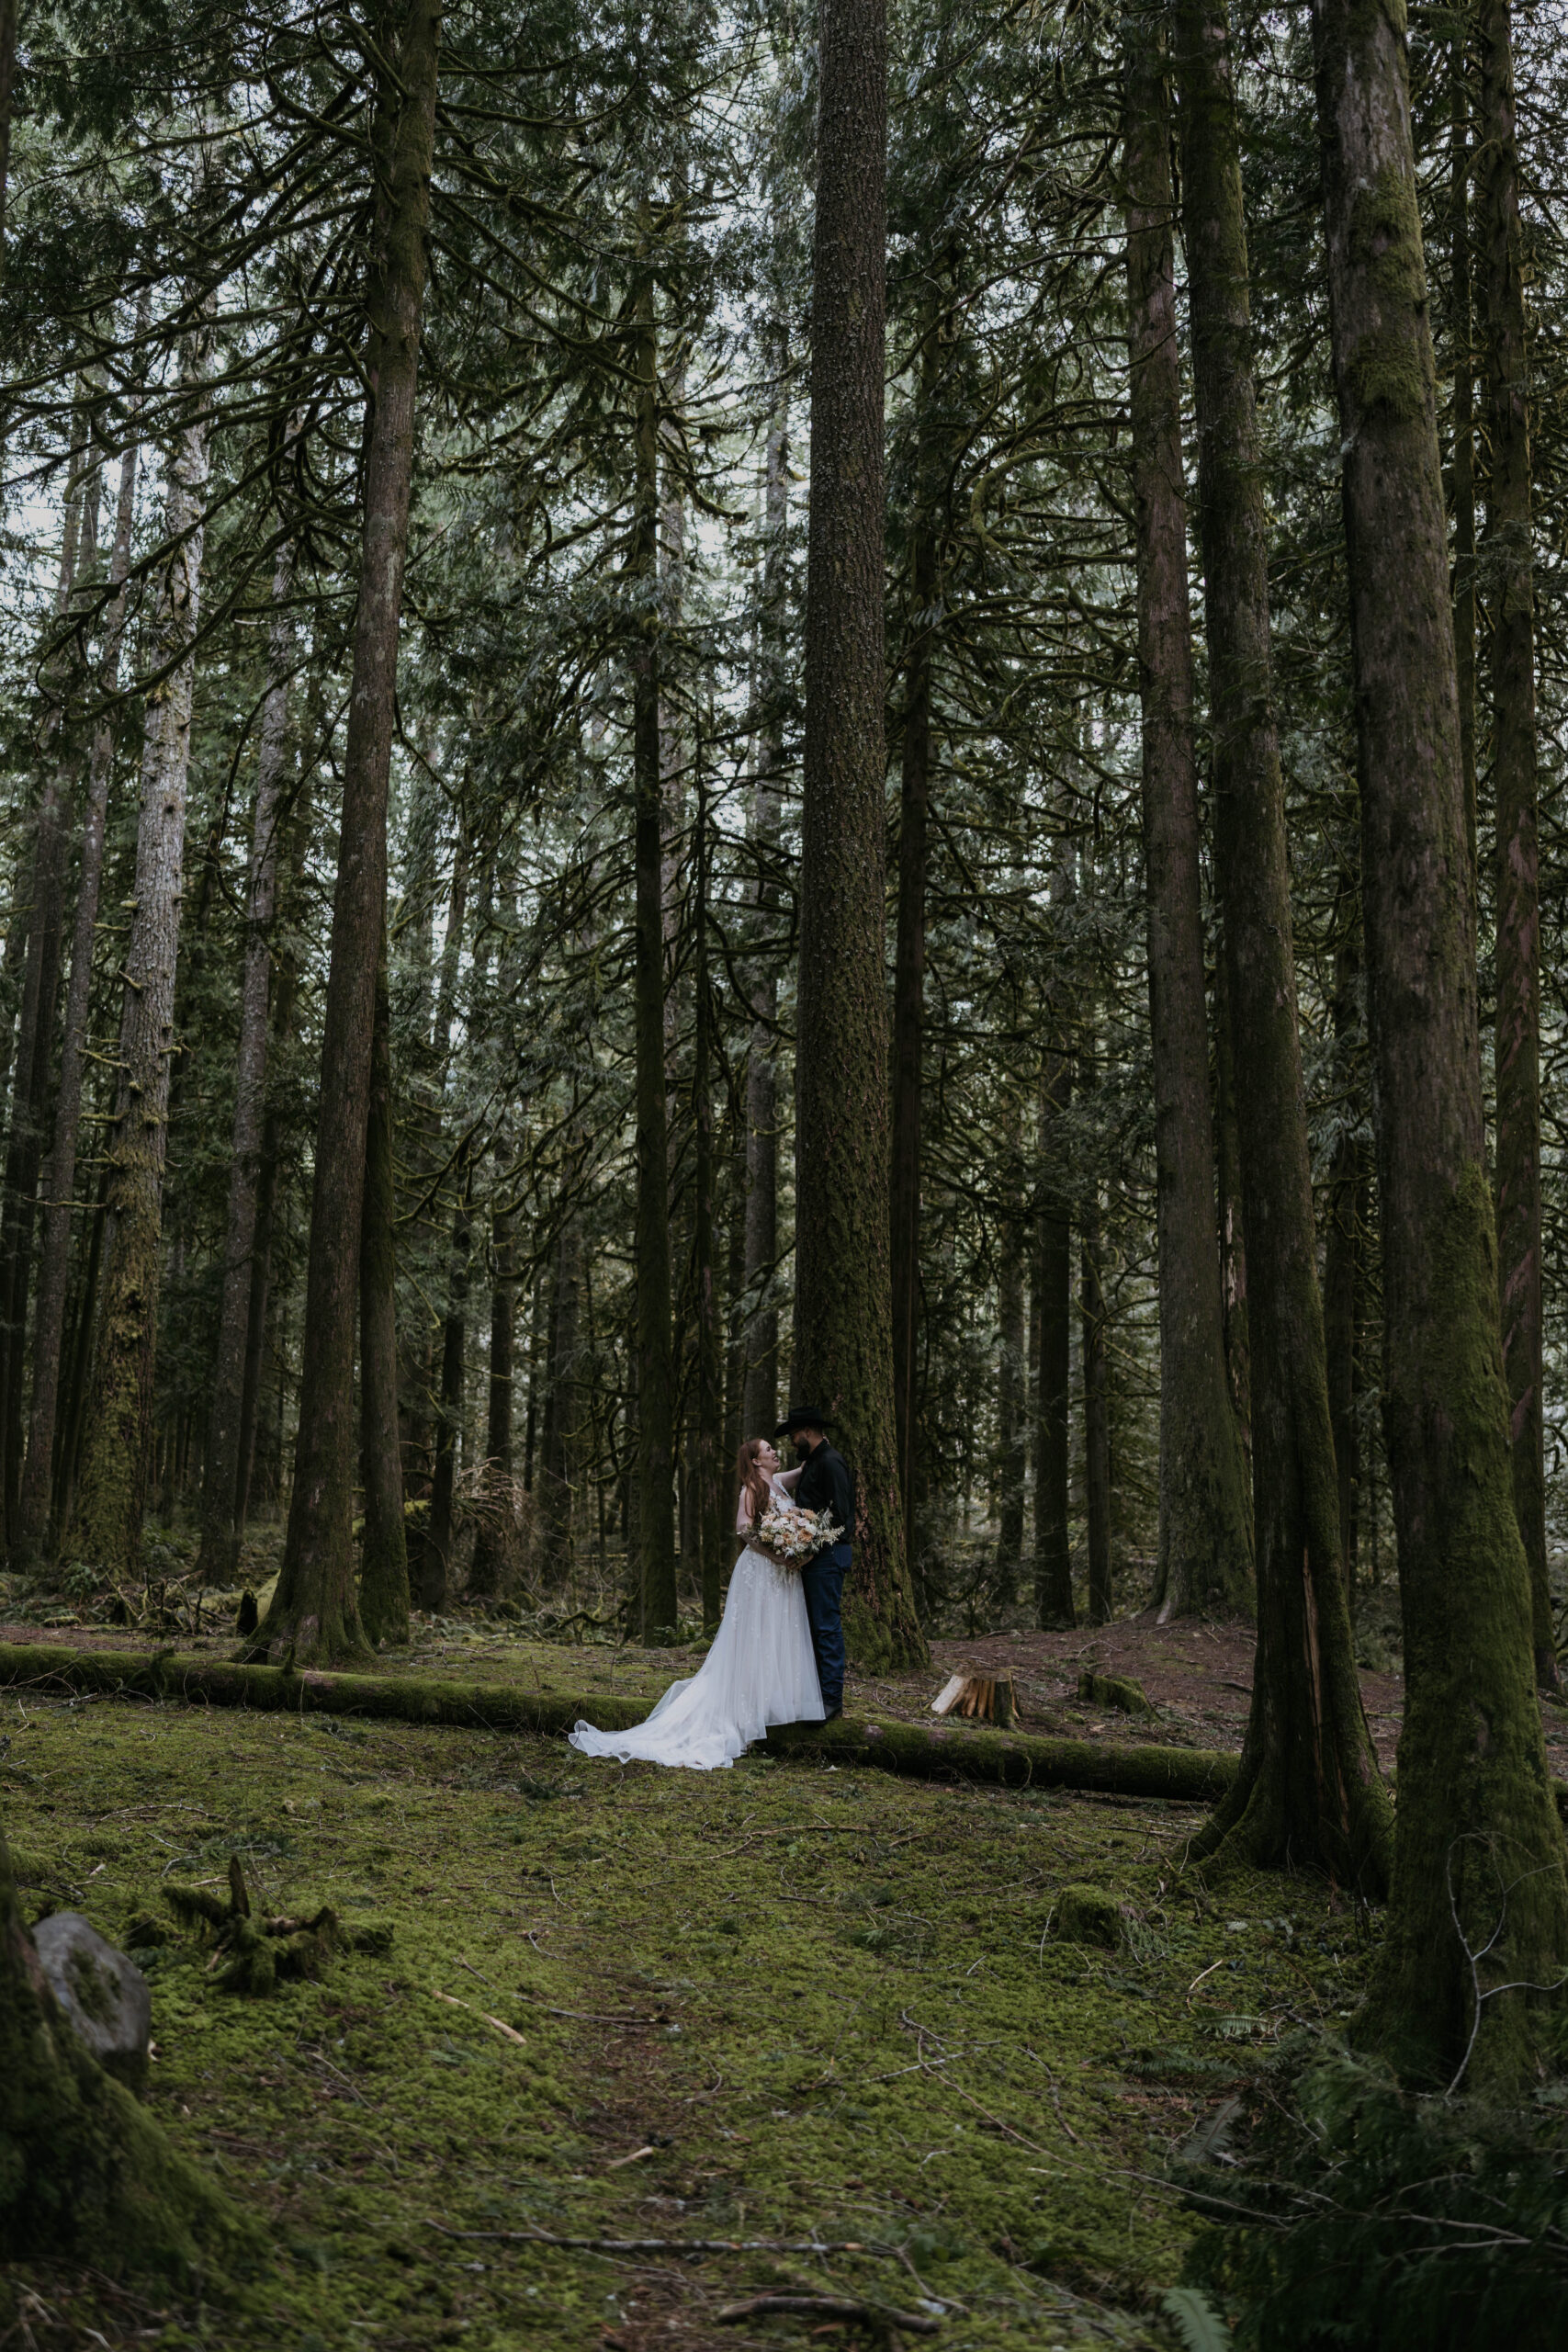 couple in a distance standing on log in wedding attire in moody forest